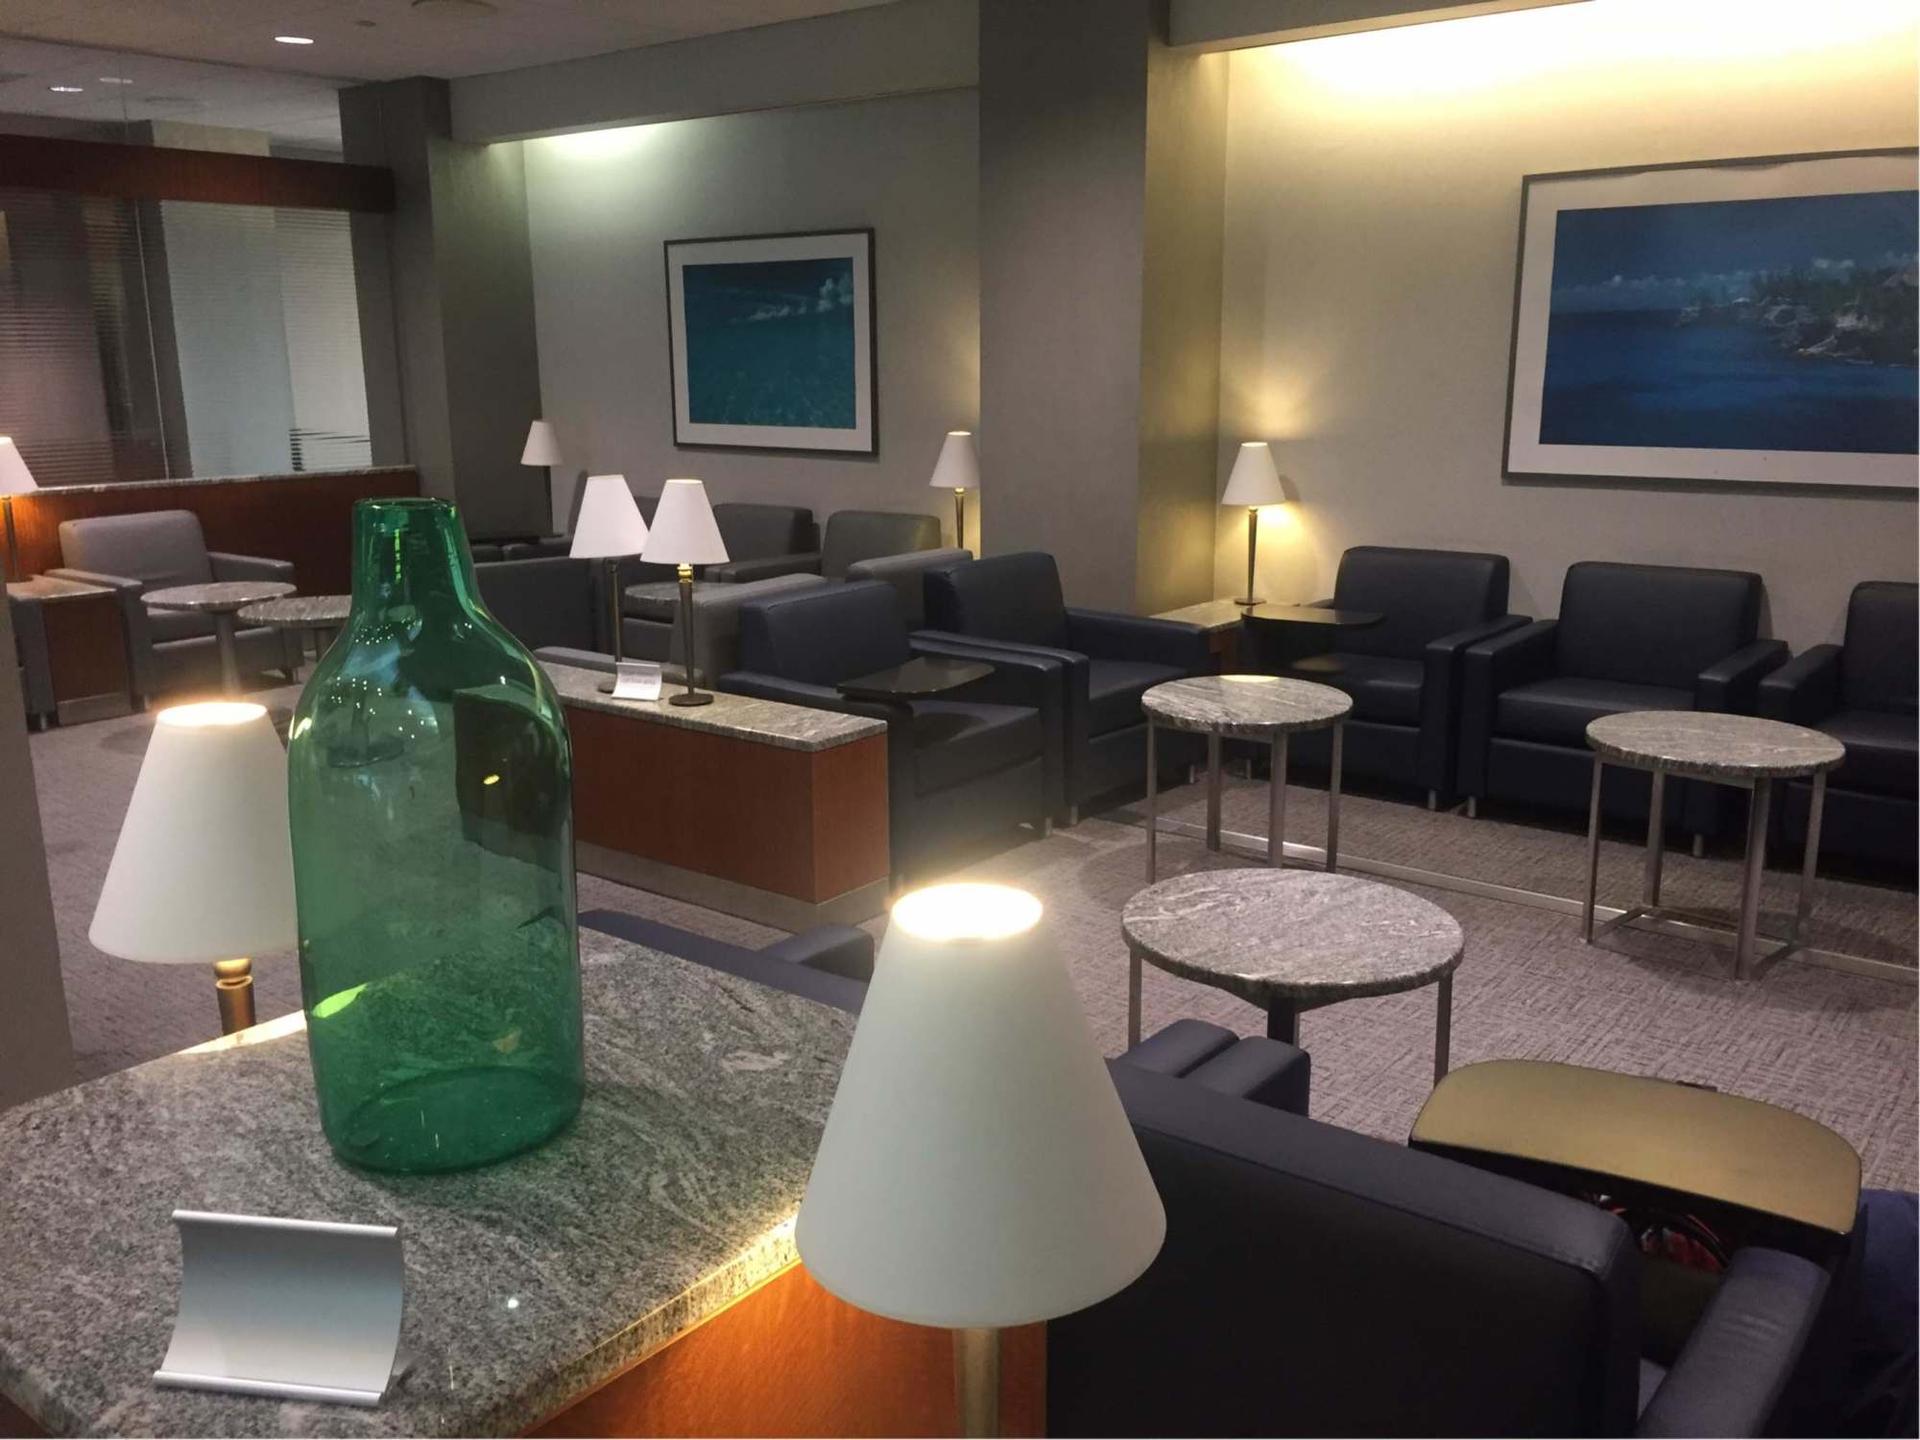 American Airlines Admirals Club image 10 of 48